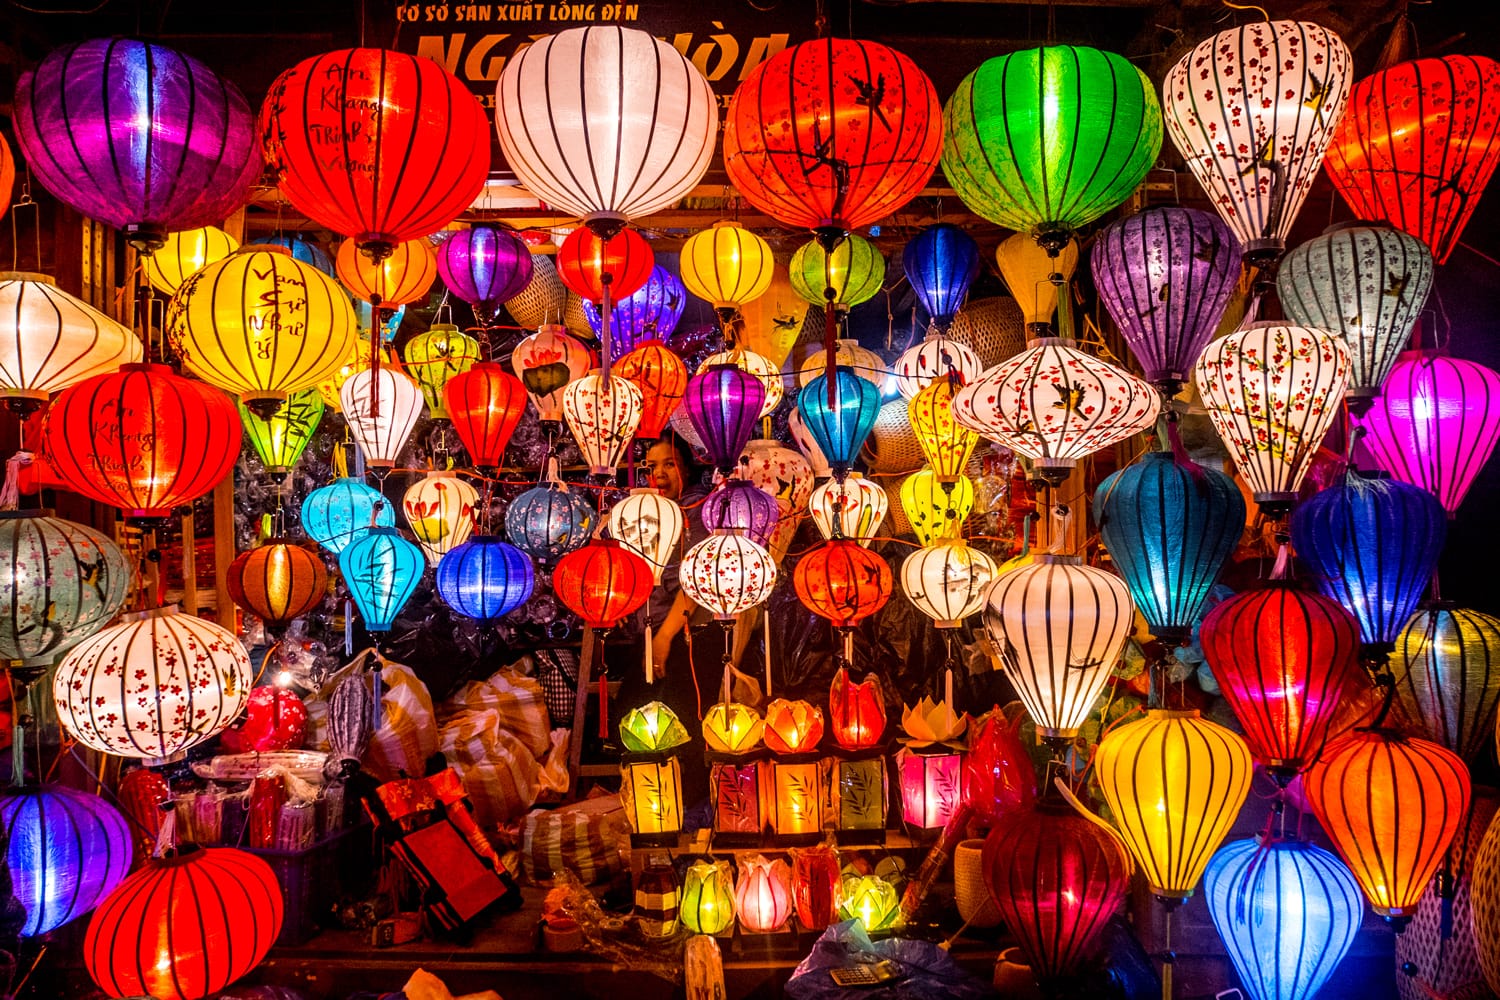 Colorful lanterns spread light on the old street of Hoi An Ancient Town